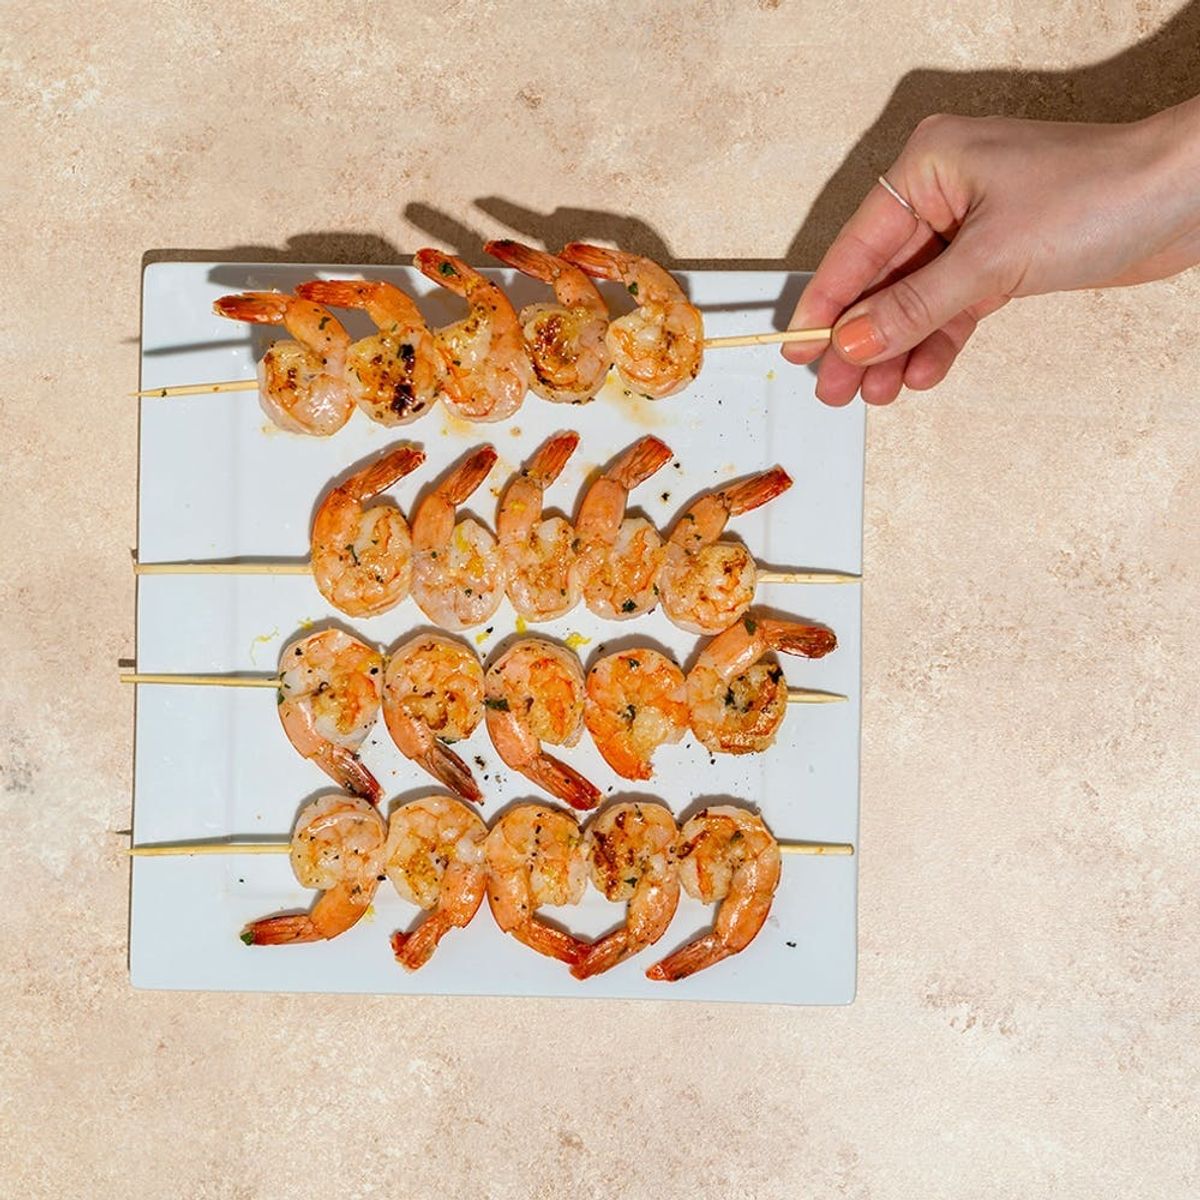 How to Quickly Cook Shrimp on the Stovetop, Grill, or in the Oven